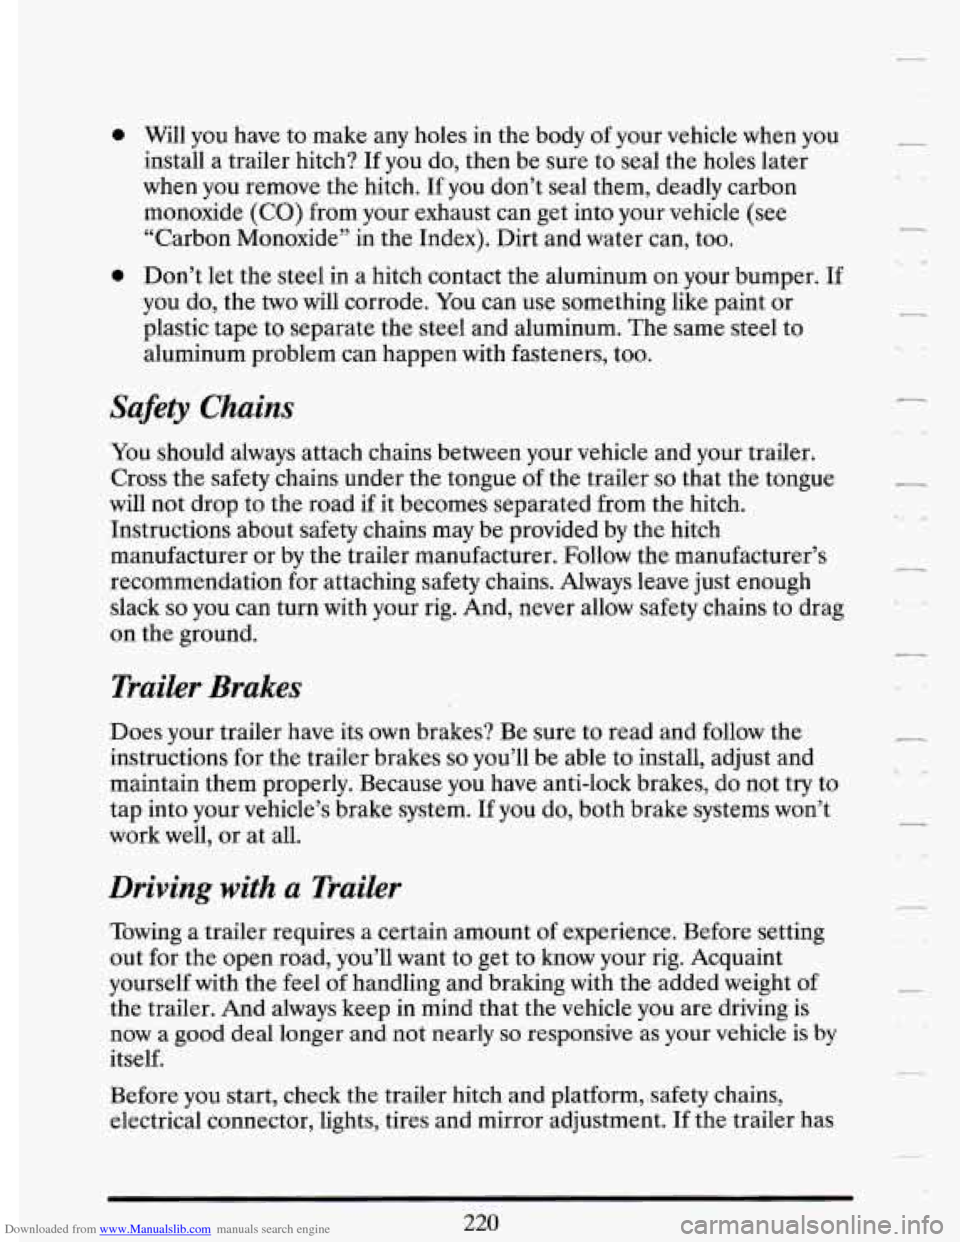 CADILLAC DEVILLE 1993 7.G Owners Manual Downloaded from www.Manualslib.com manuals search engine e Will  you  have to make any holes  in the  body of your vehicle when  you 
install a  trailer hitch?  If  you do,  then  be sure  to  seal th